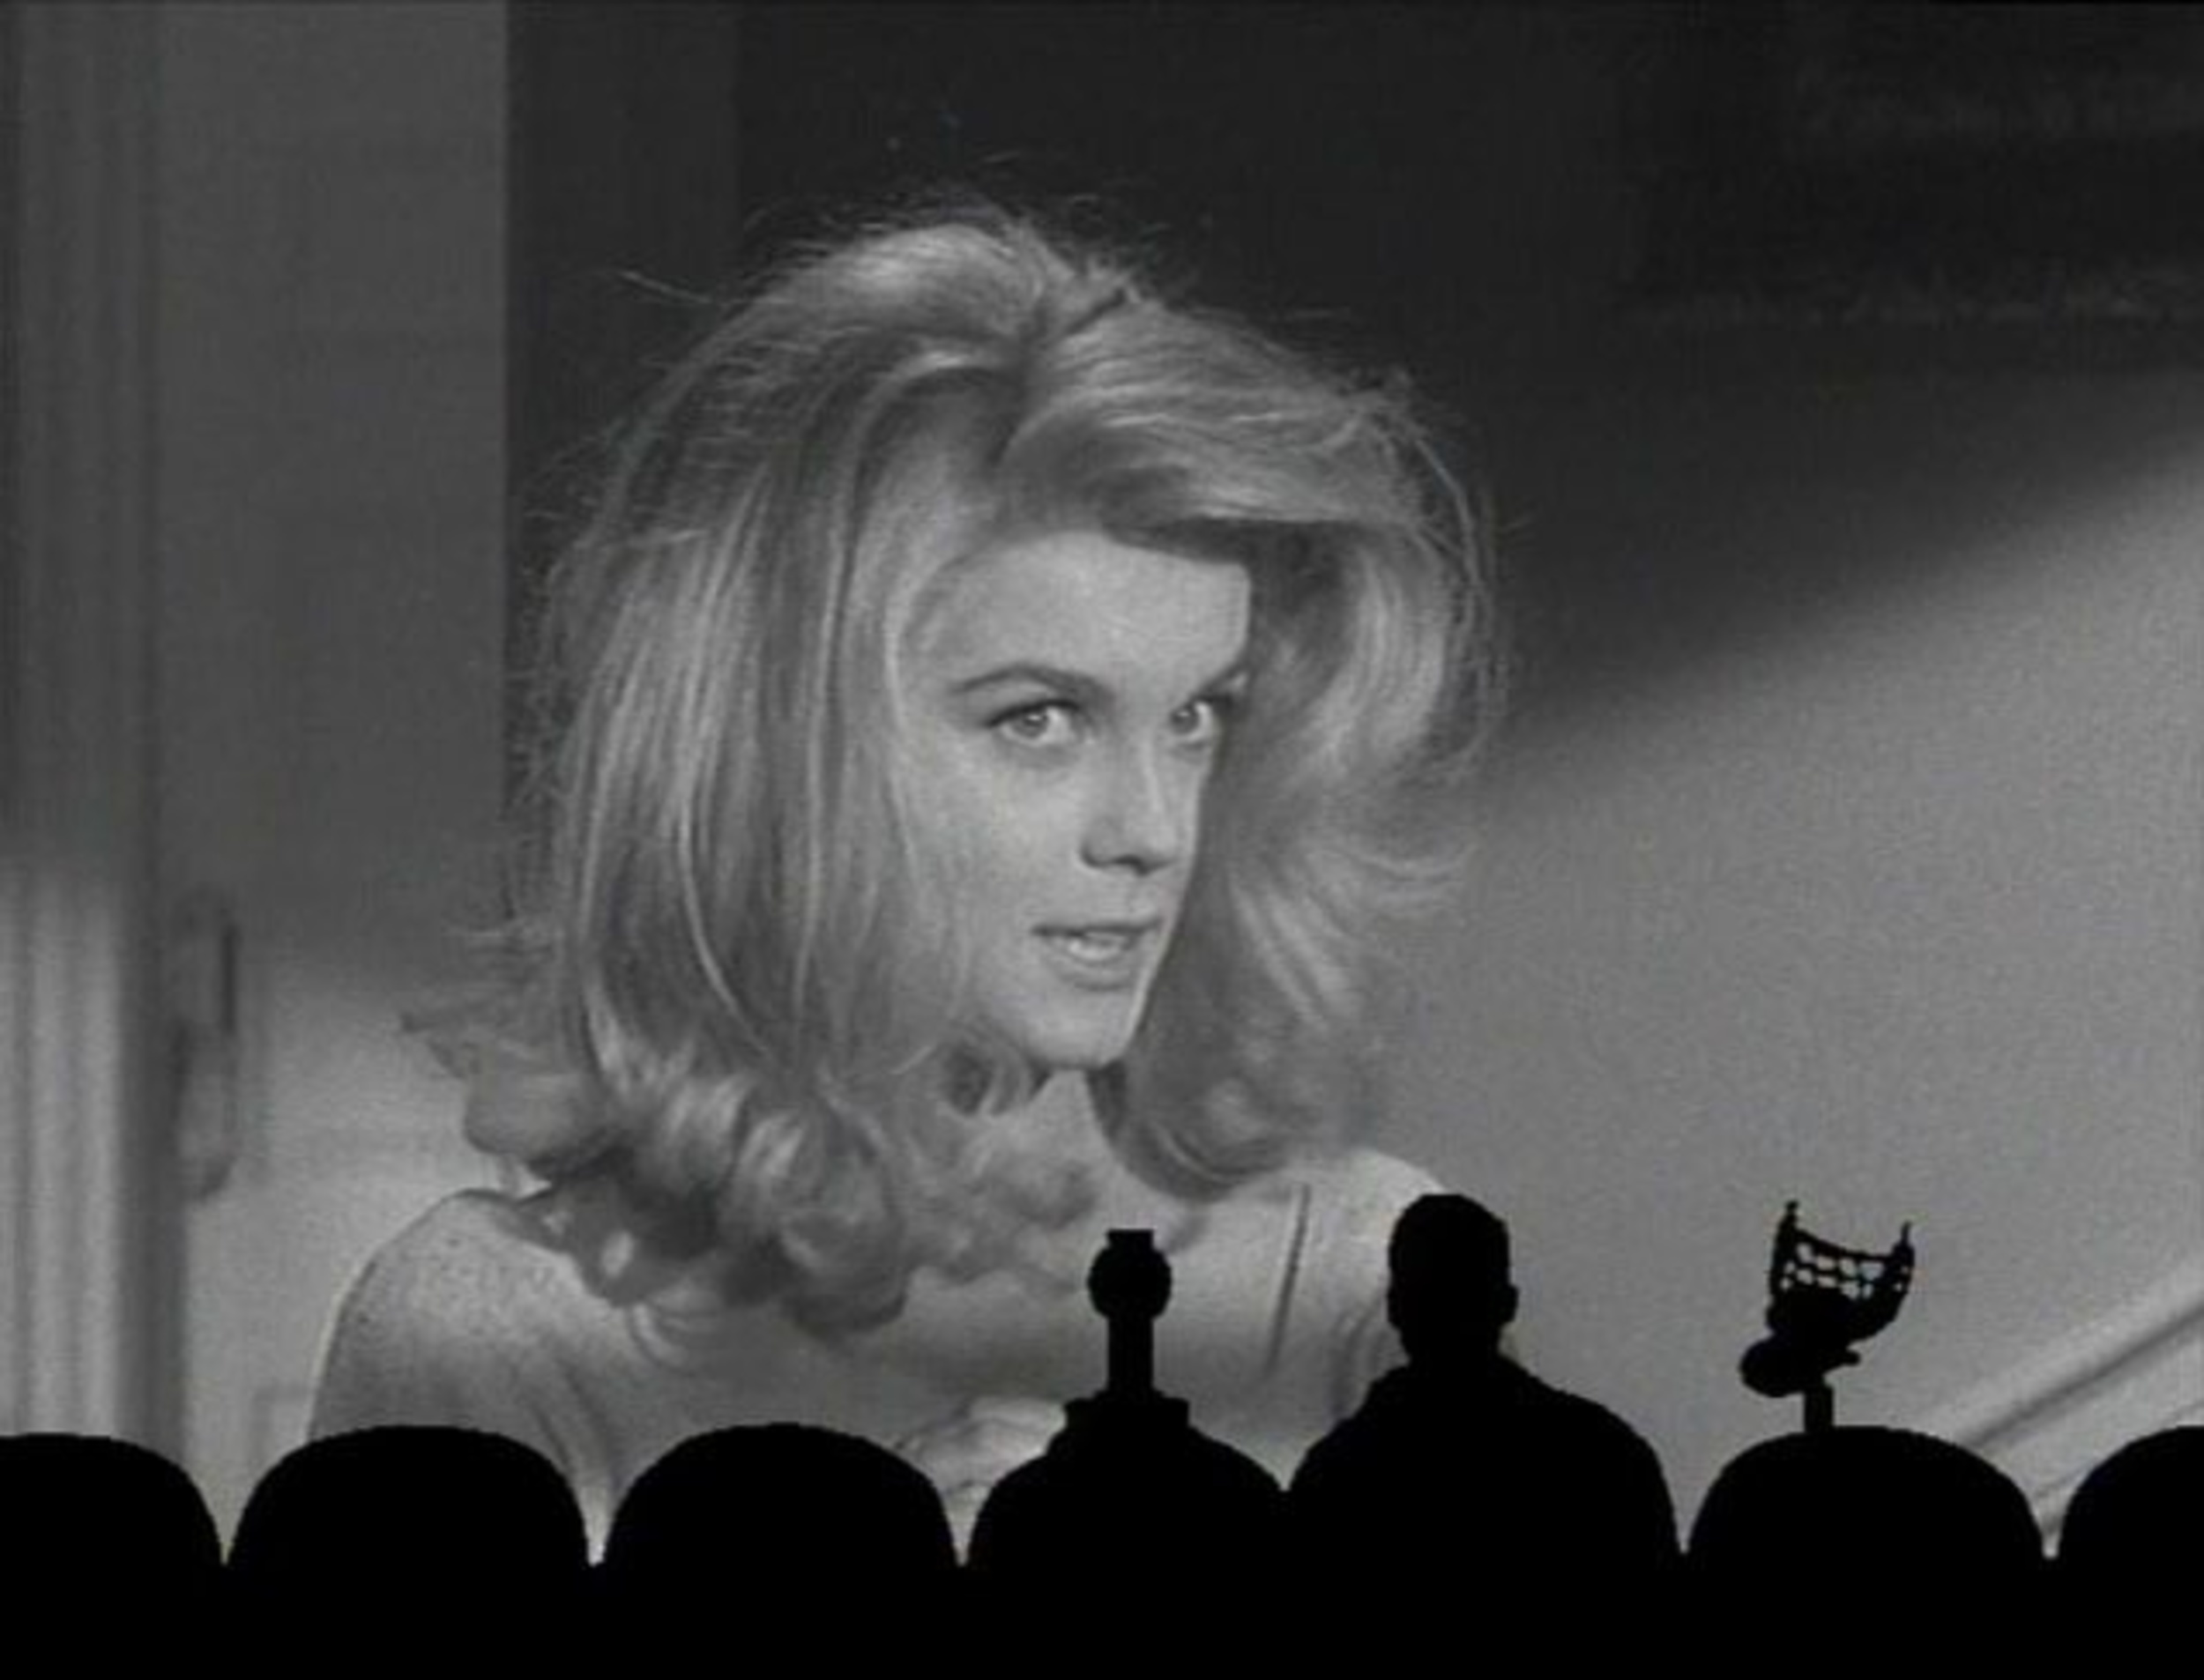 <p>On the one hand, “Kitten with a Whip” is probably of a higher quality than most of the movies screened on “MST3K.” However, it’s still not good, and frankly it’s to the episode’s benefit the movie isn’t terrible. Some of the movies used for the show were actively hard to get through. Plus, this Ann-Margret teen angst film still provides plenty of joke fodder.</p><p><a href='https://www.msn.com/en-us/community/channel/vid-cj9pqbr0vn9in2b6ddcd8sfgpfq6x6utp44fssrv6mc2gtybw0us'>Follow us on MSN to see more of our exclusive entertainment content.</a></p>